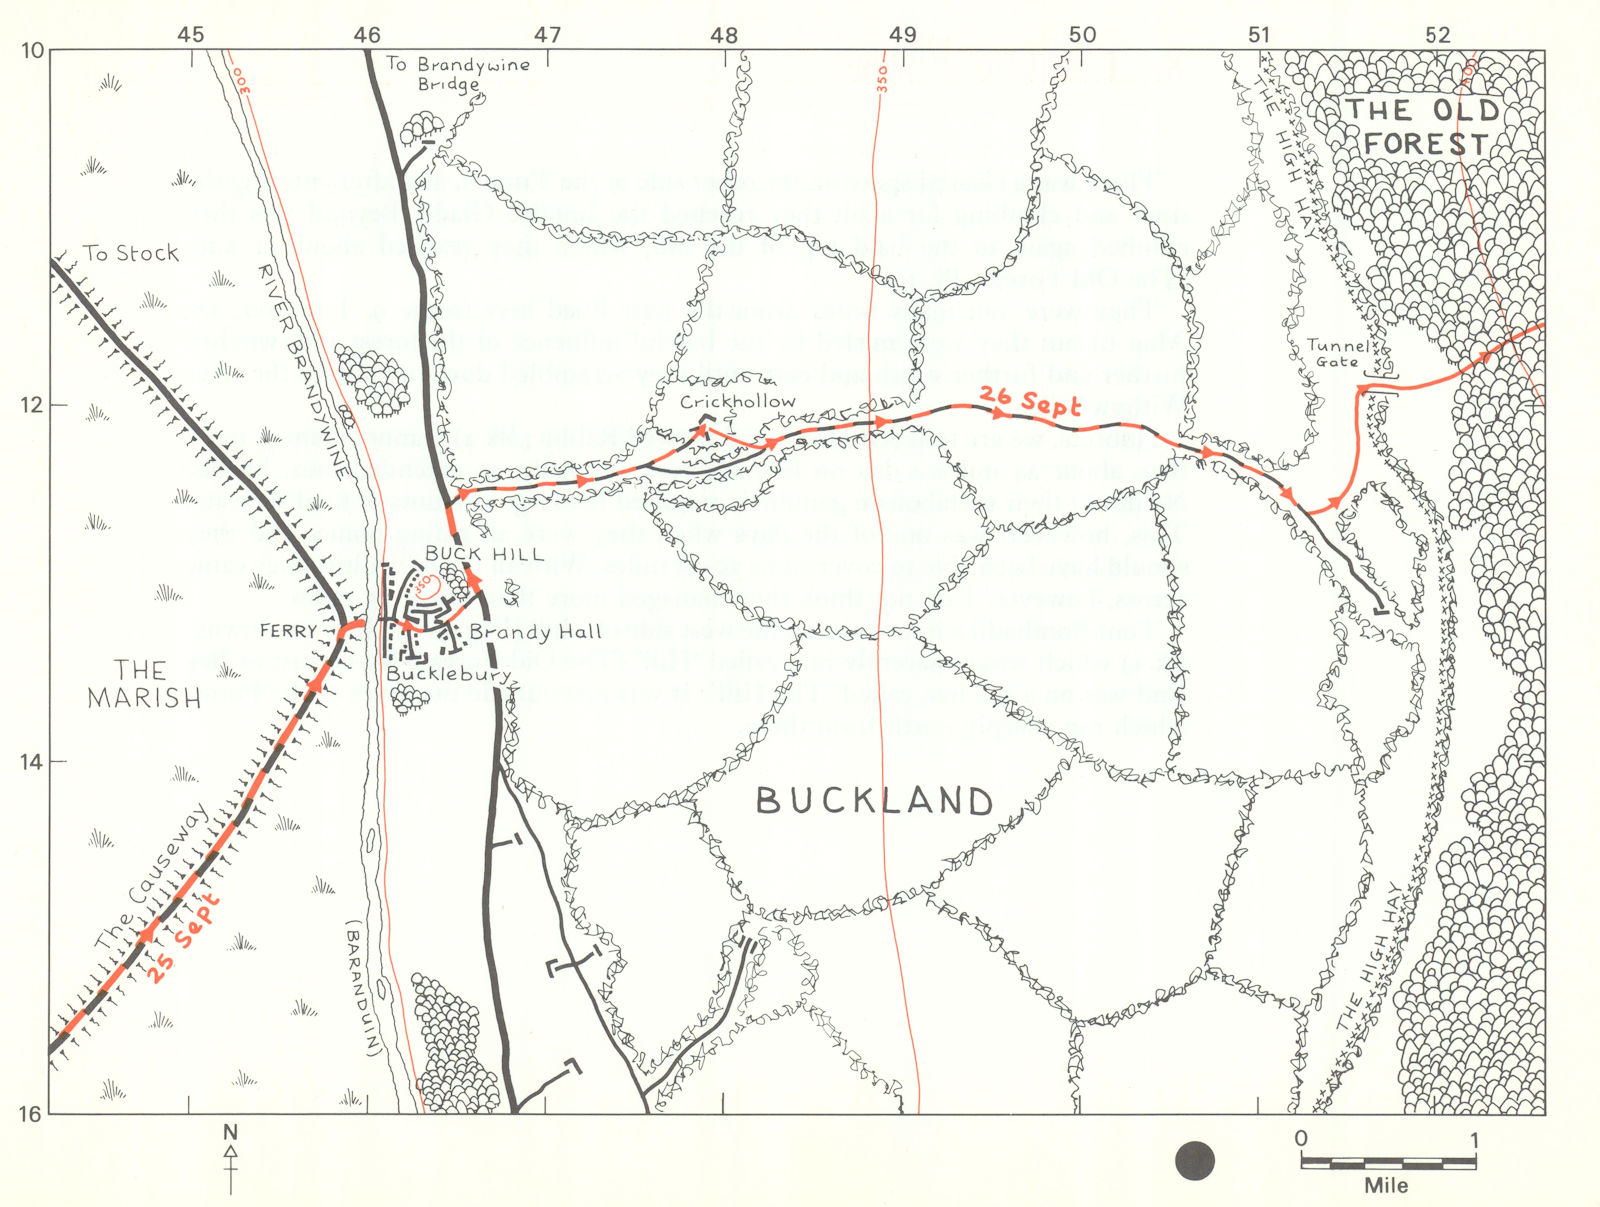 MIDDLE-EARTH Bucklebury & the Hedge. Frodo's route. TOLKIEN/STRACHEY 1981 map